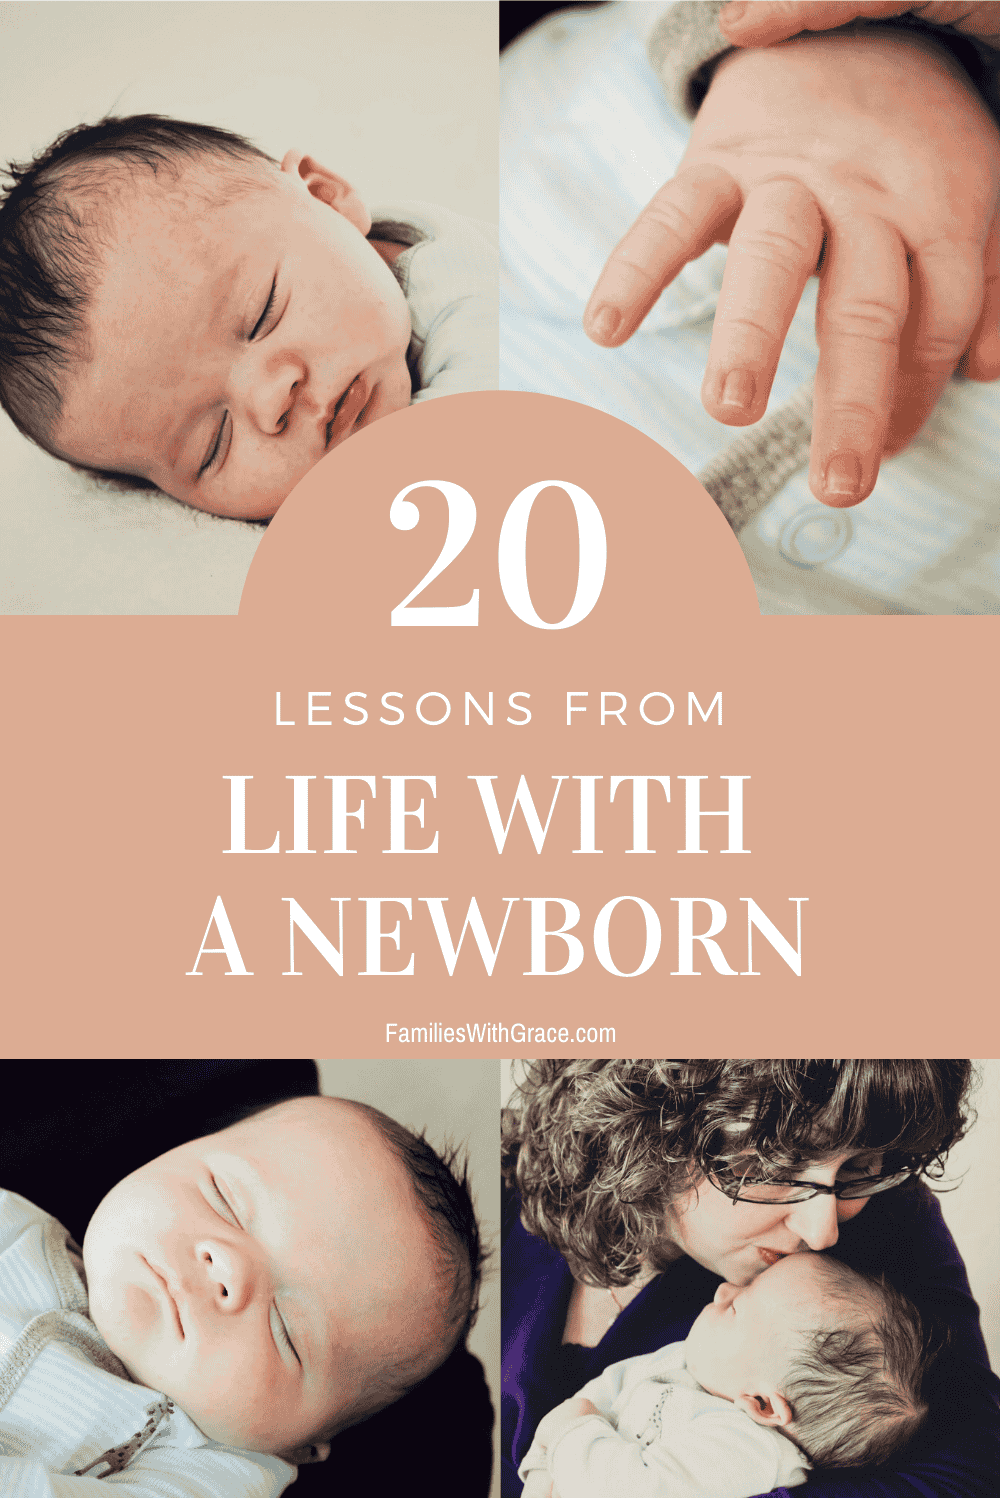 20 Lessons from life with a newborn